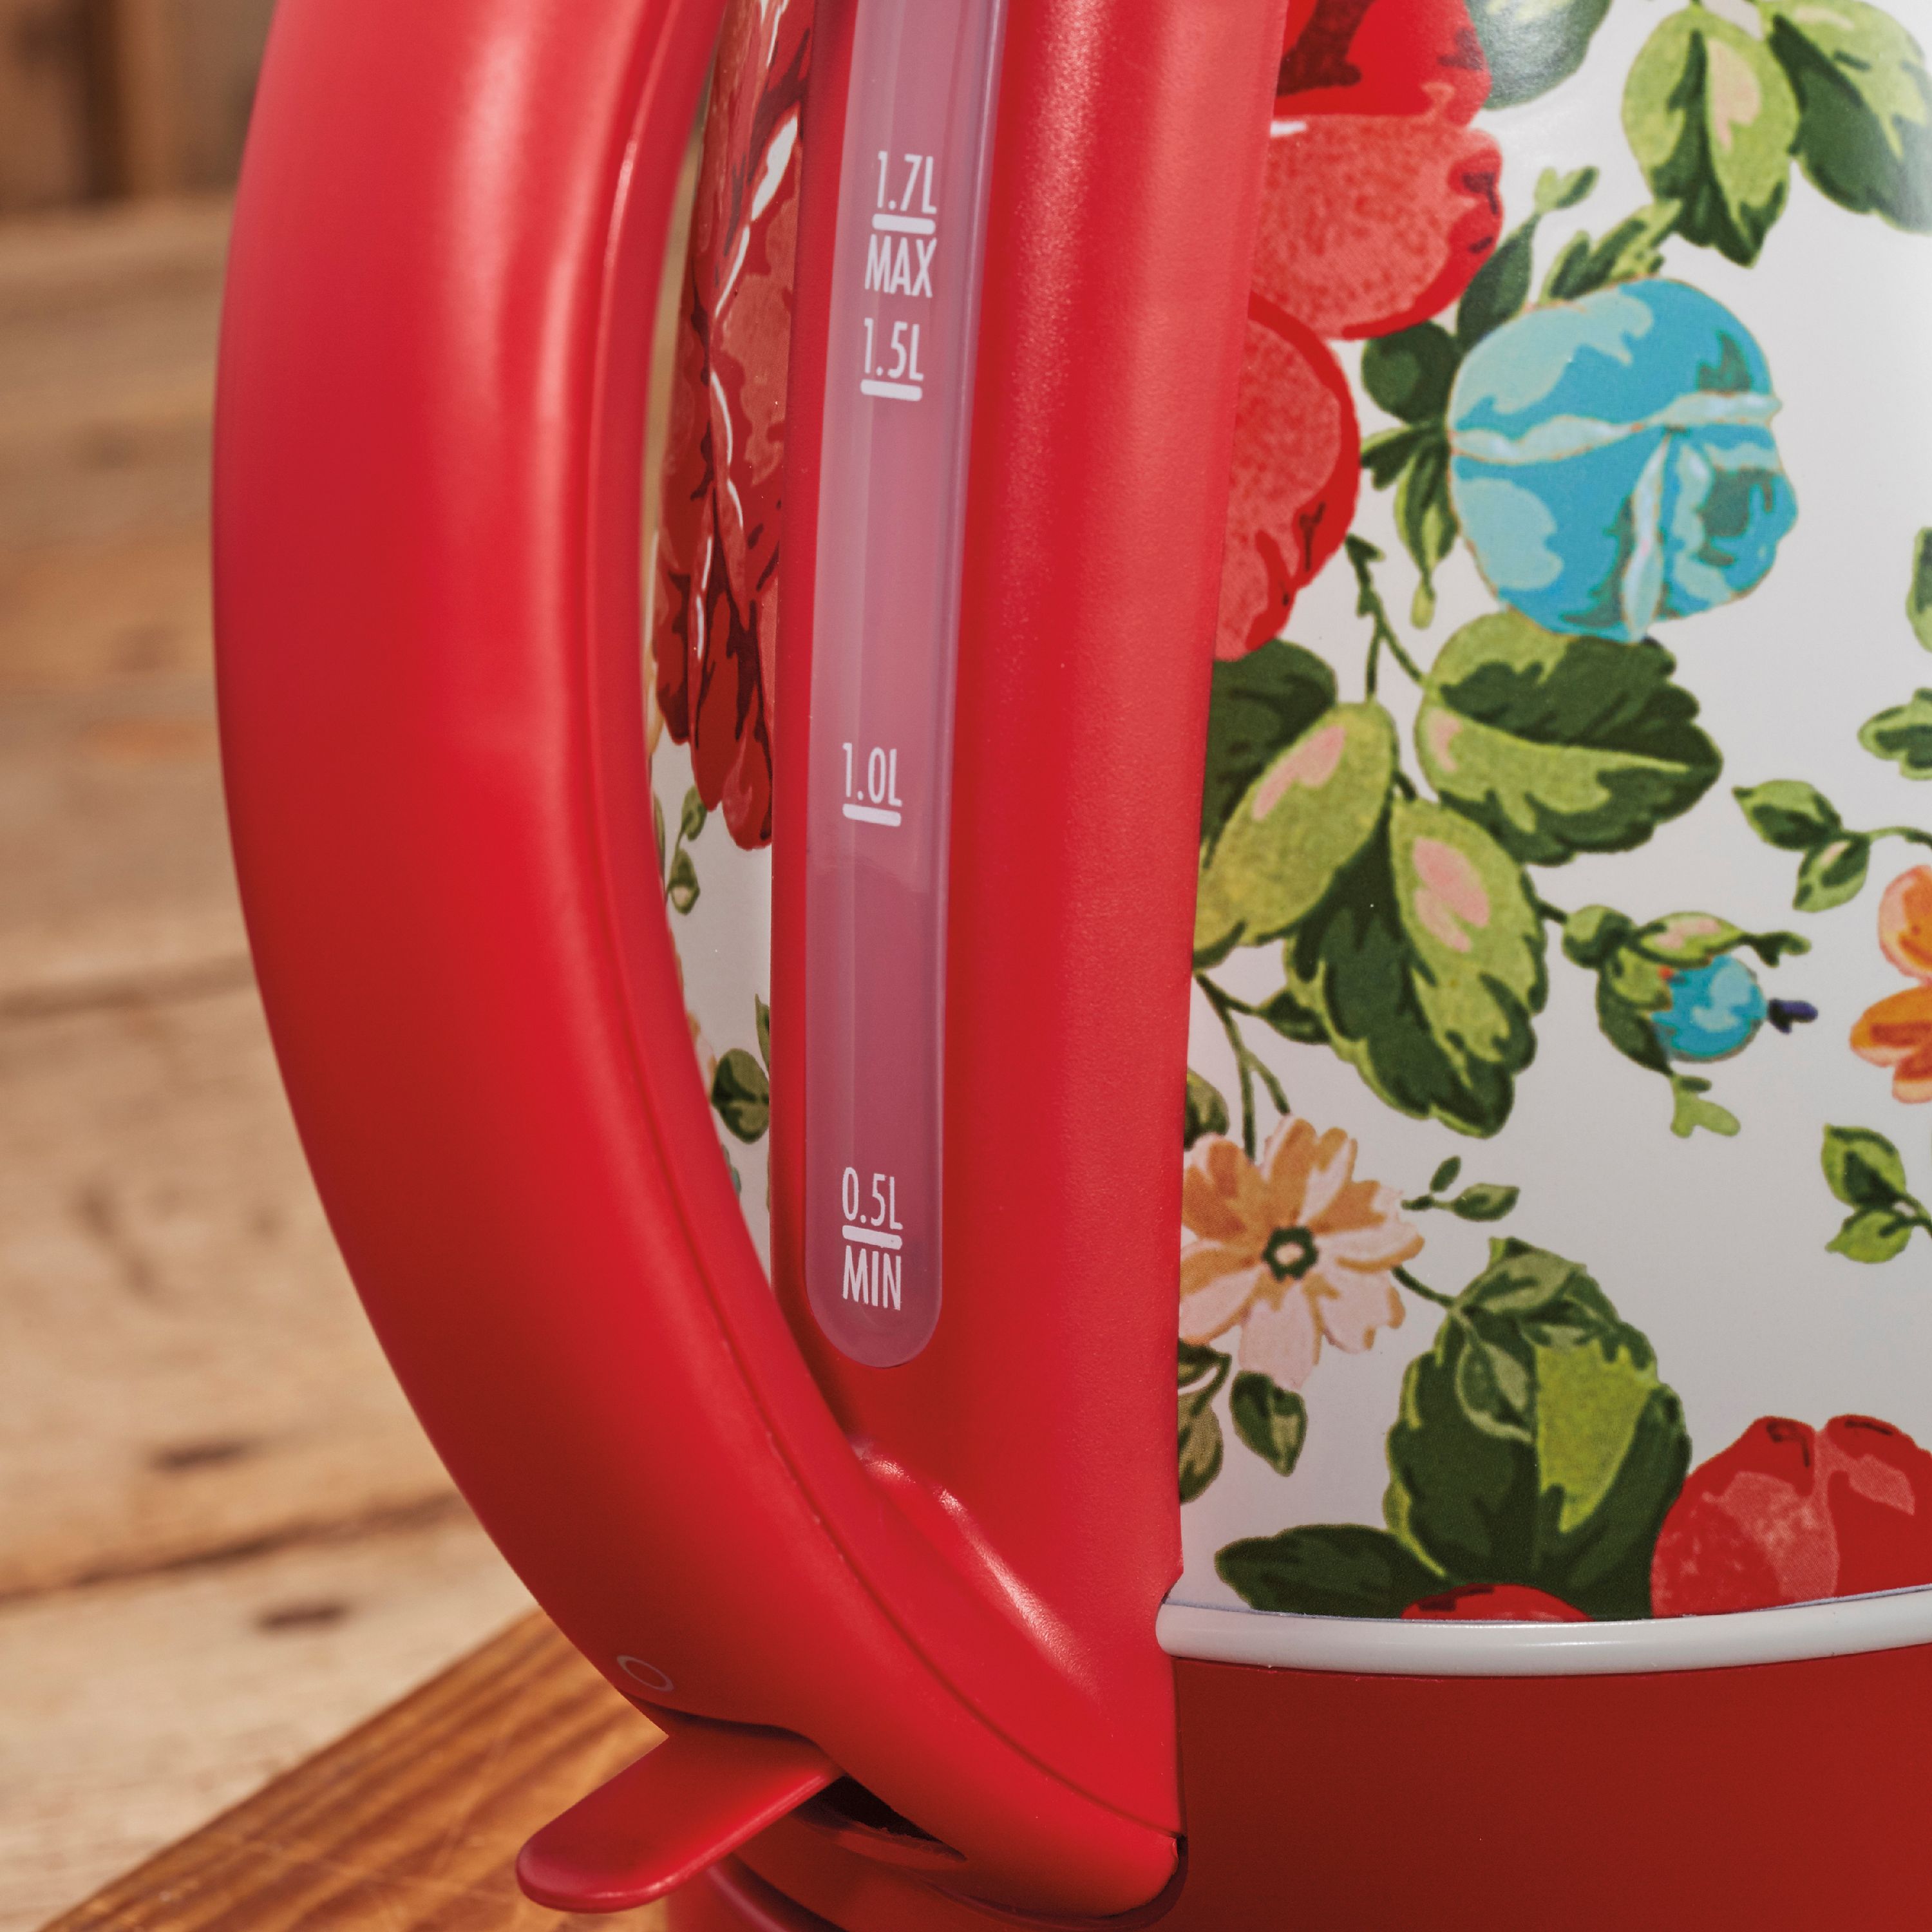 The Pioneer Woman 1.7 Liter Electric Kettle, Vintage Floral Red, 40970 - image 4 of 7